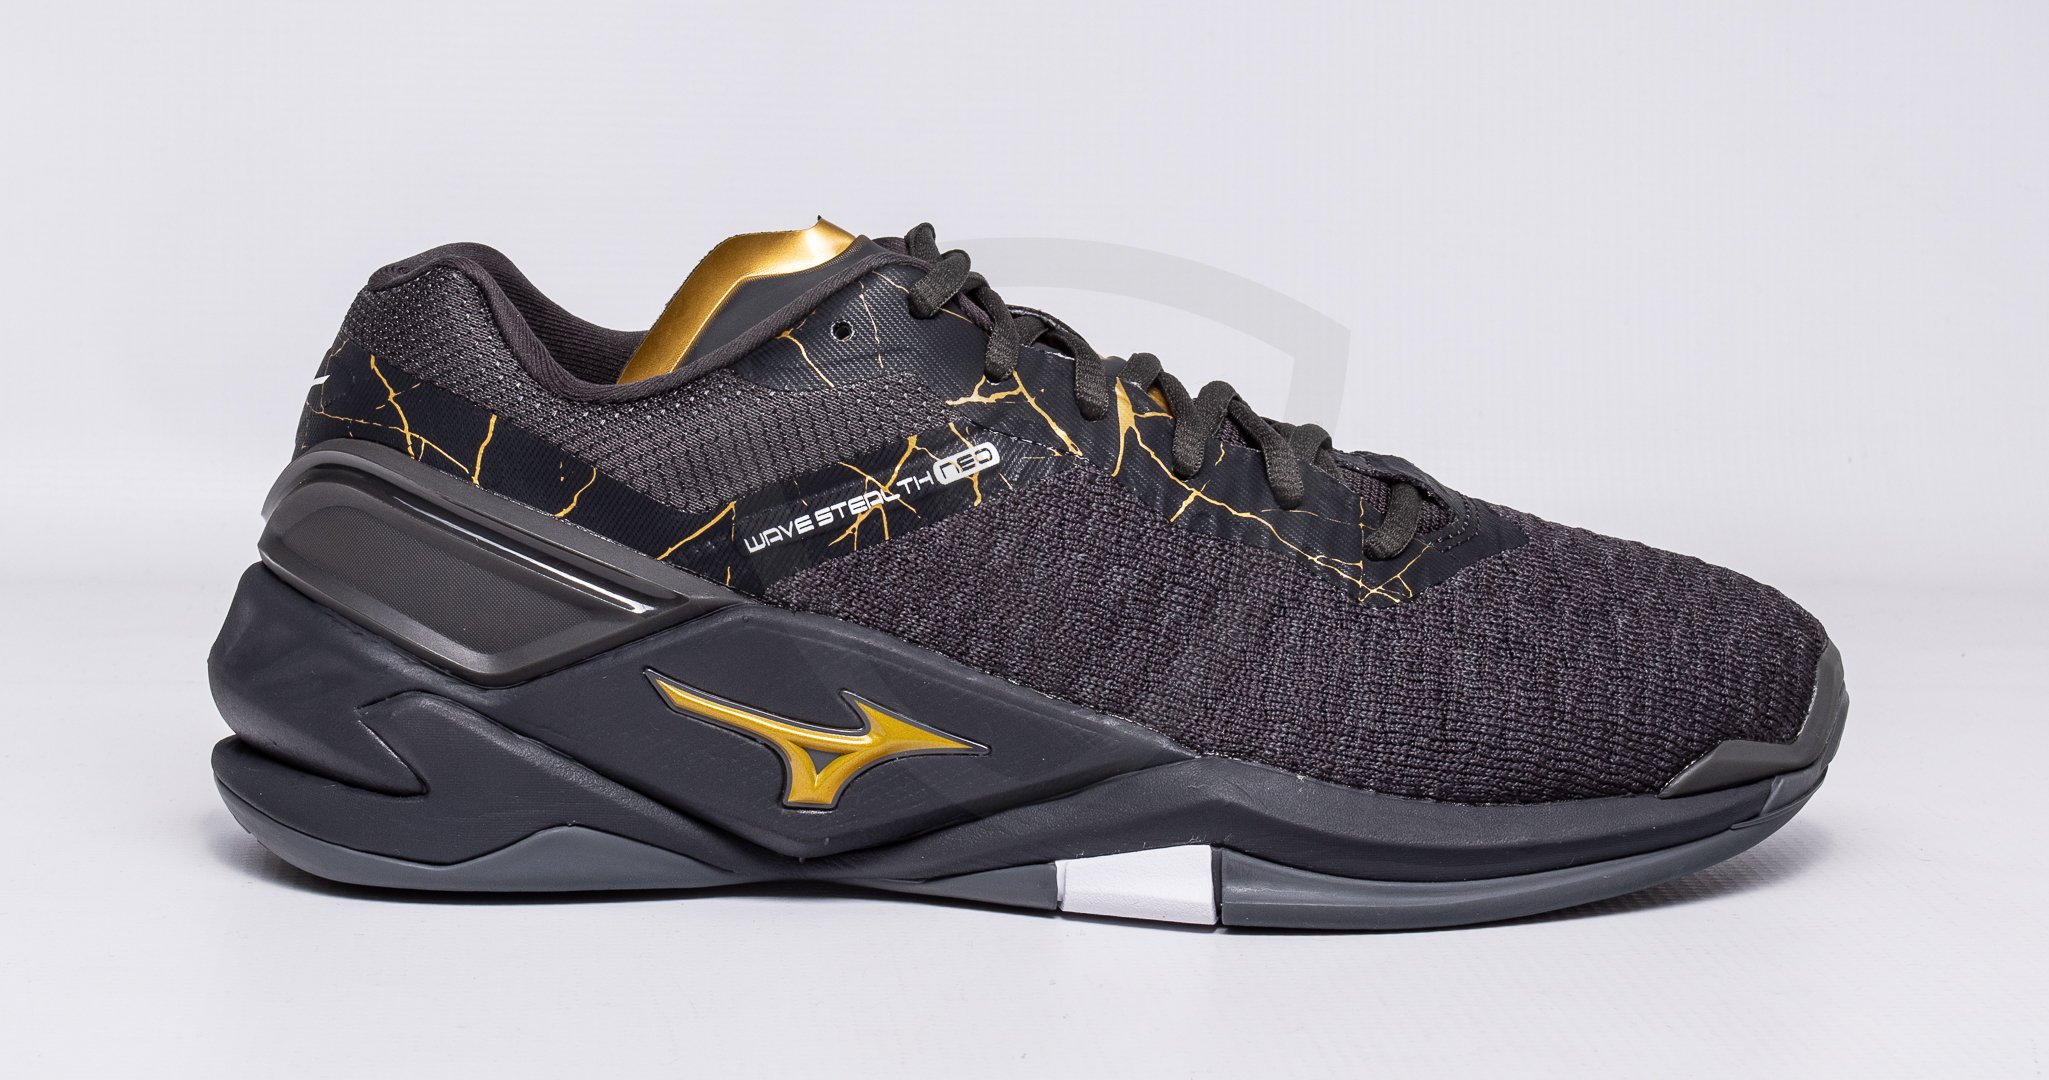 Mizuno WAVE STEALTH NEO BlkOyster-MPGold-IronGat UK 11 / US 12 / EUR 46 / CM 30